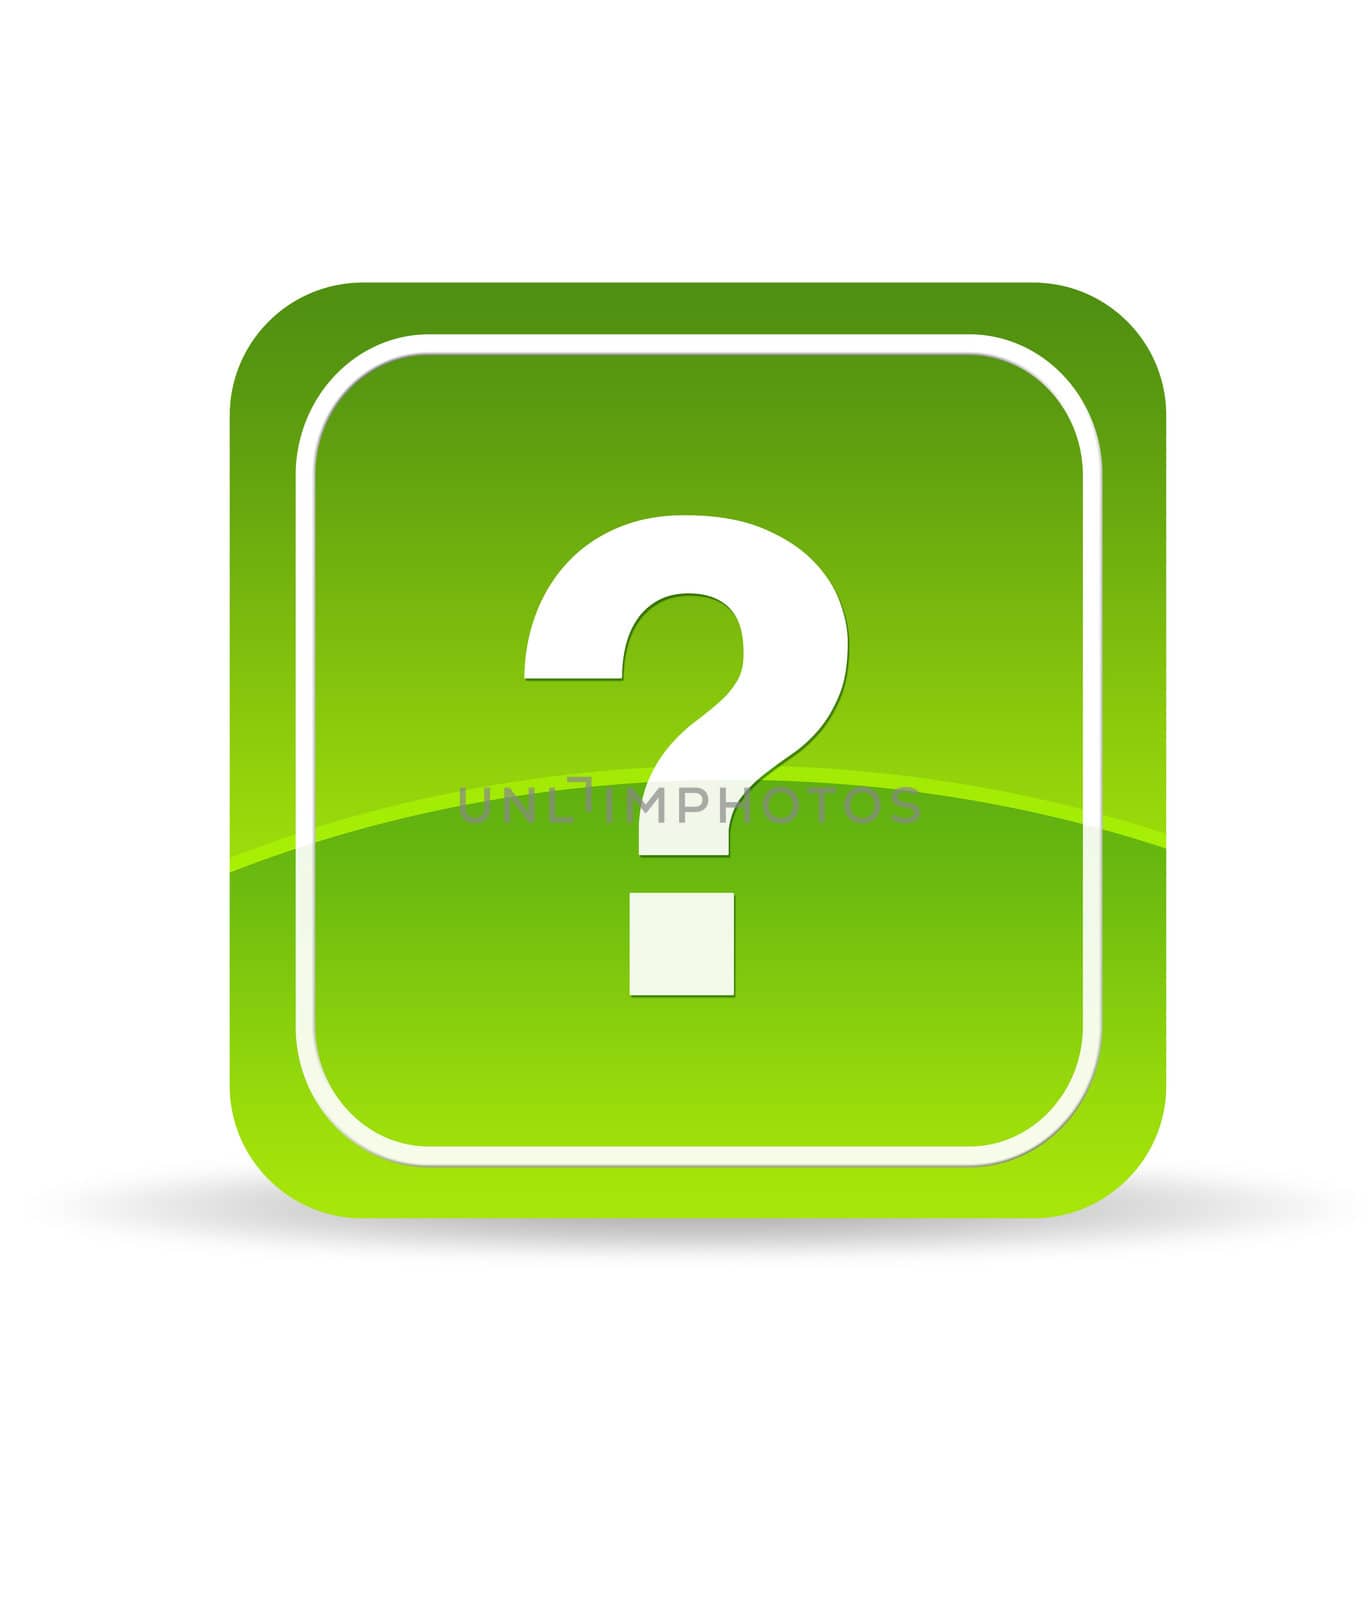 High resolution green question mark icon on white background.